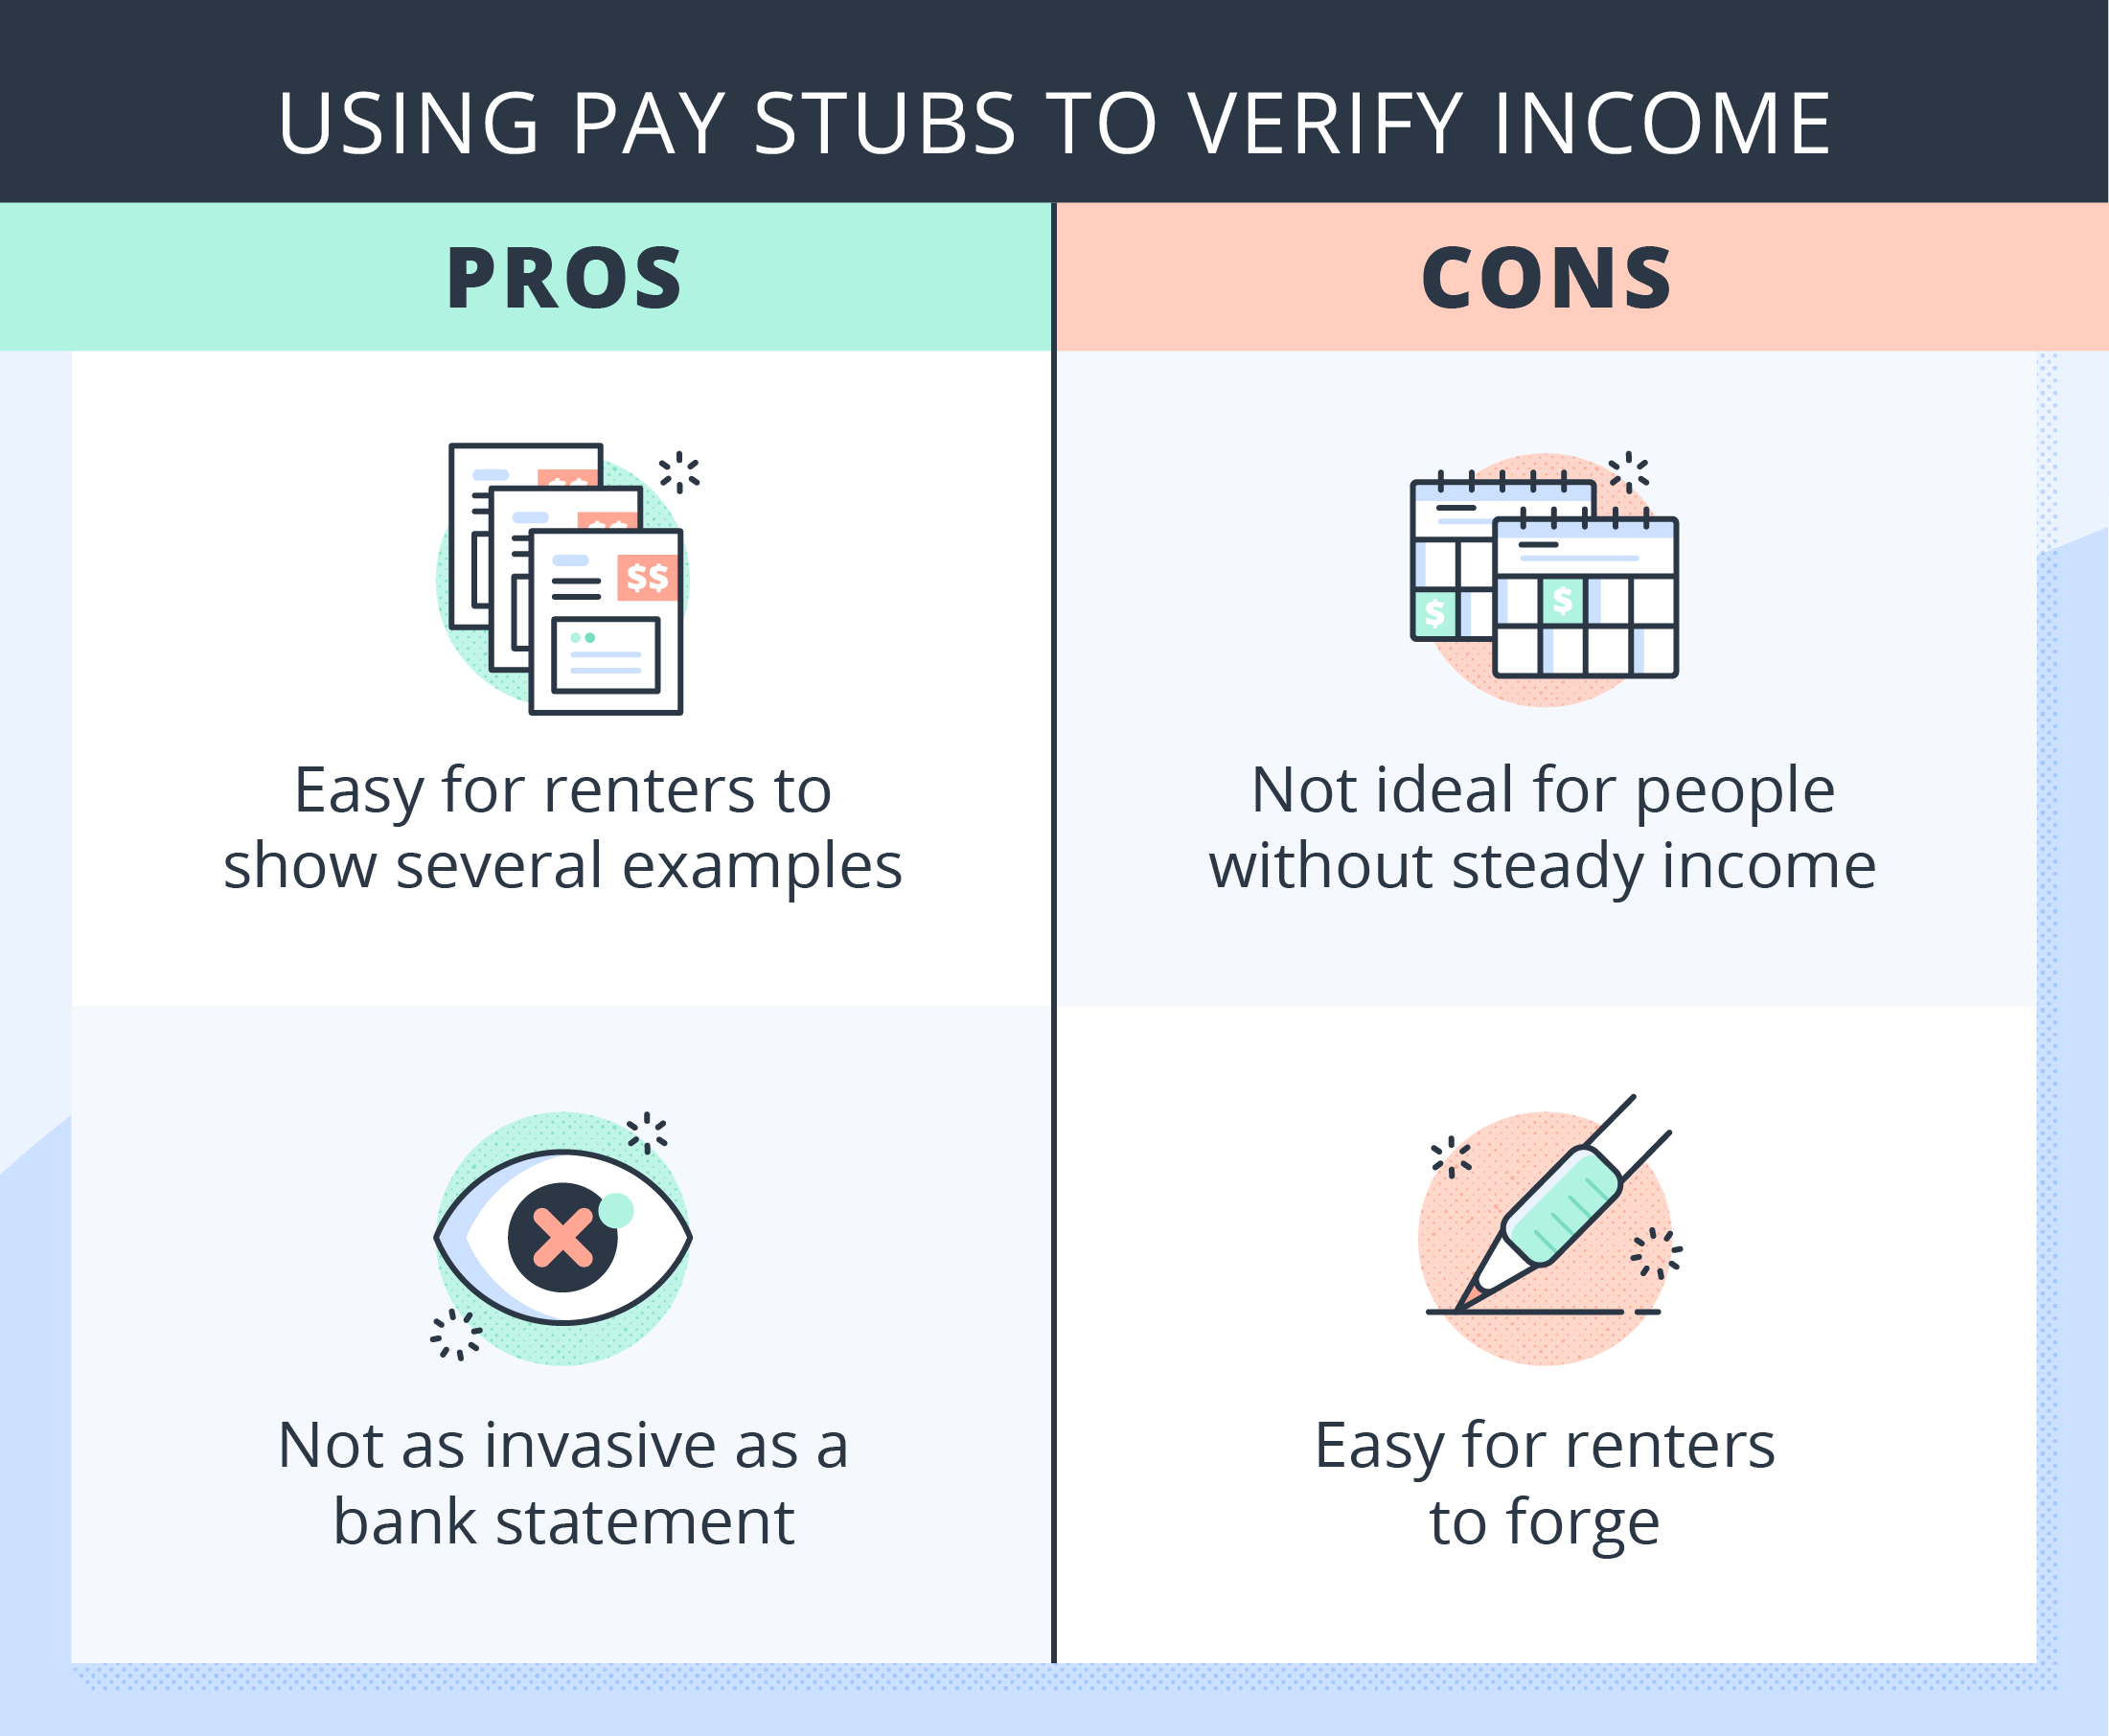 The pros and cons of using pay stubs to verify income. The pros include that it's easy for renters to show several examples and not as invasive as a bank statement. The cons are that pay stubs aren't ideal for people without a steady income, like performers, and they're easy for renters to forge.